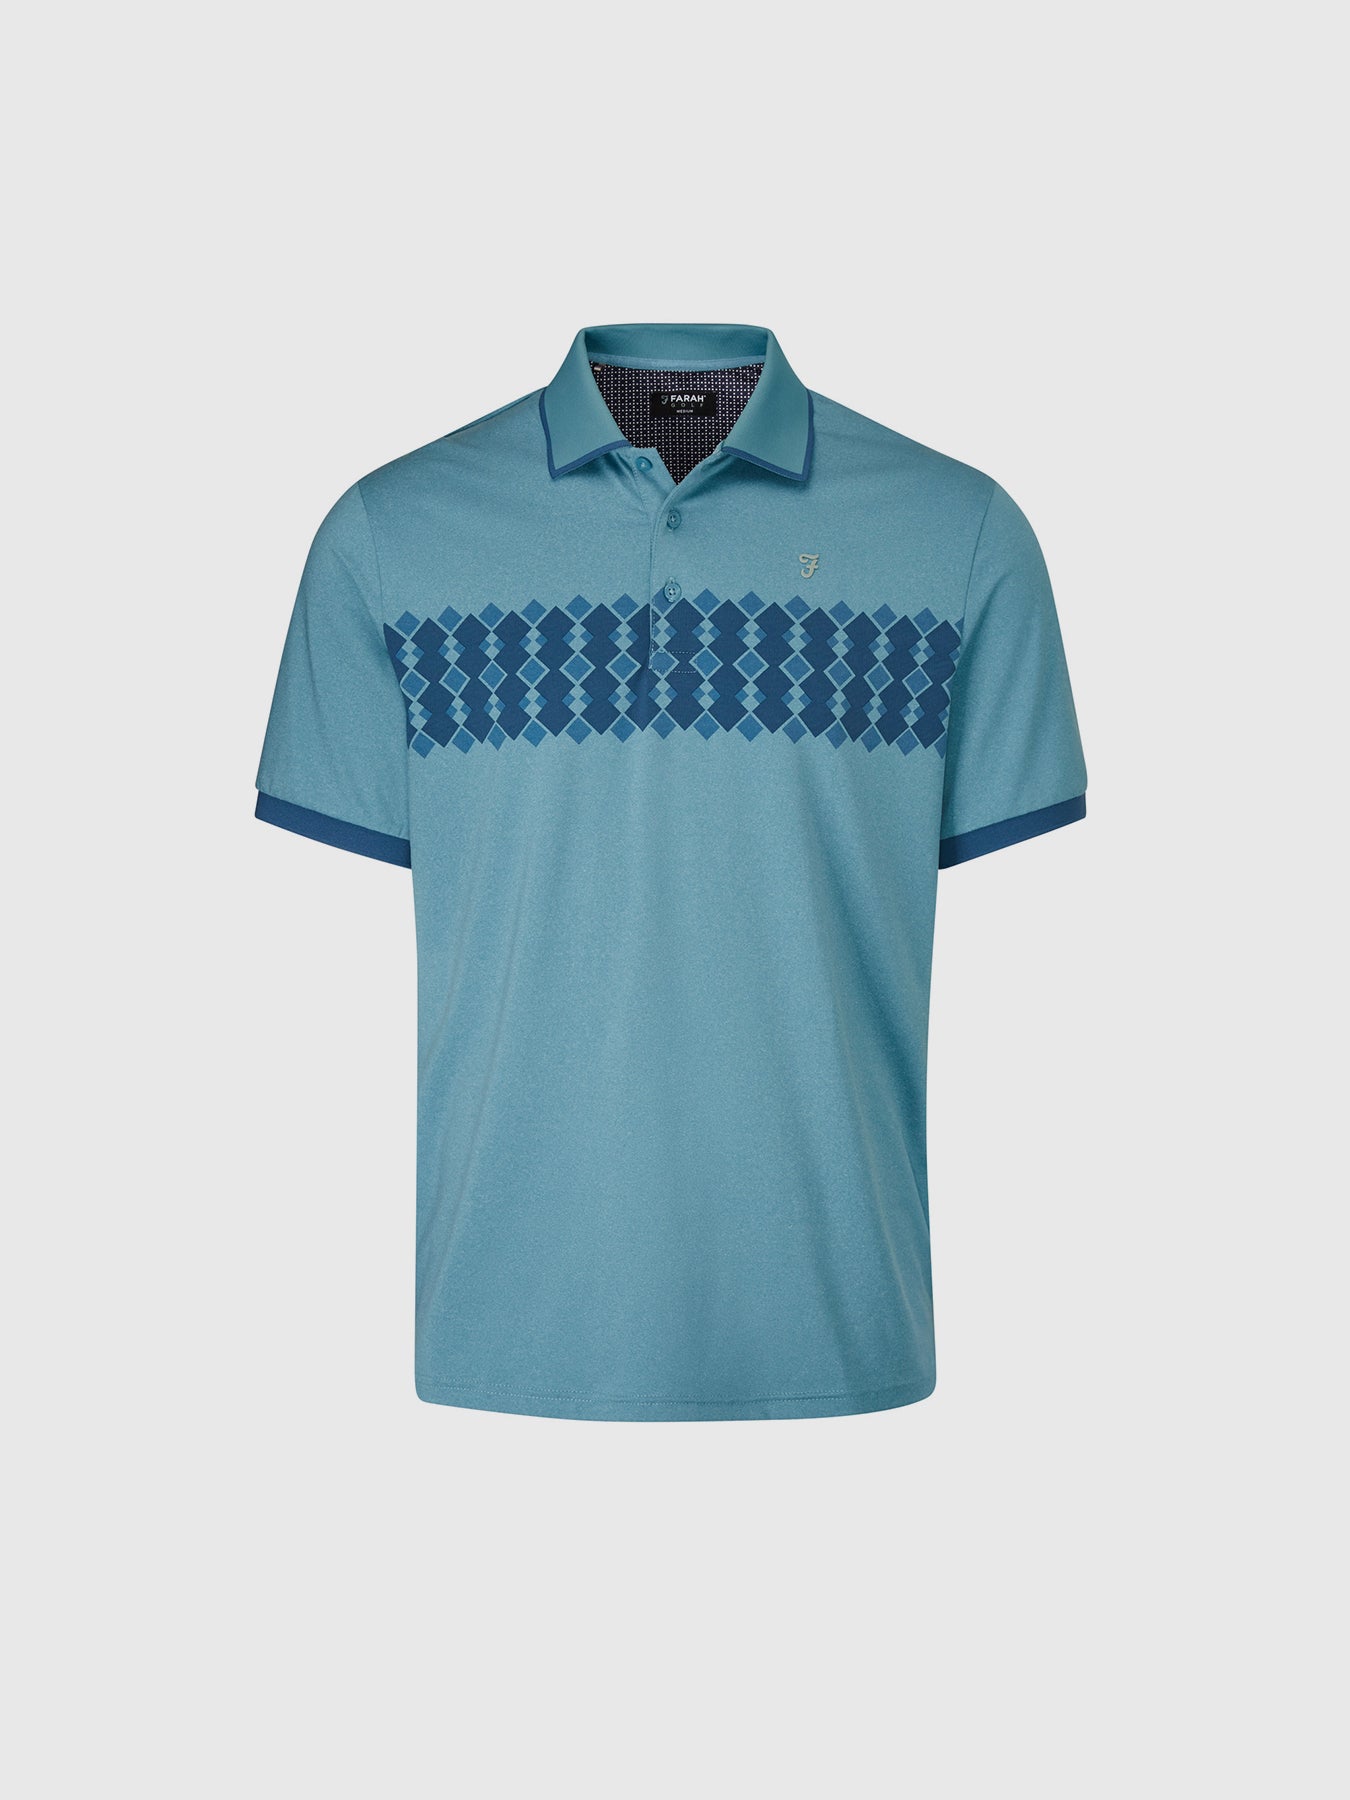 View Addison Golf Polo Shirt In Dusky Blue information